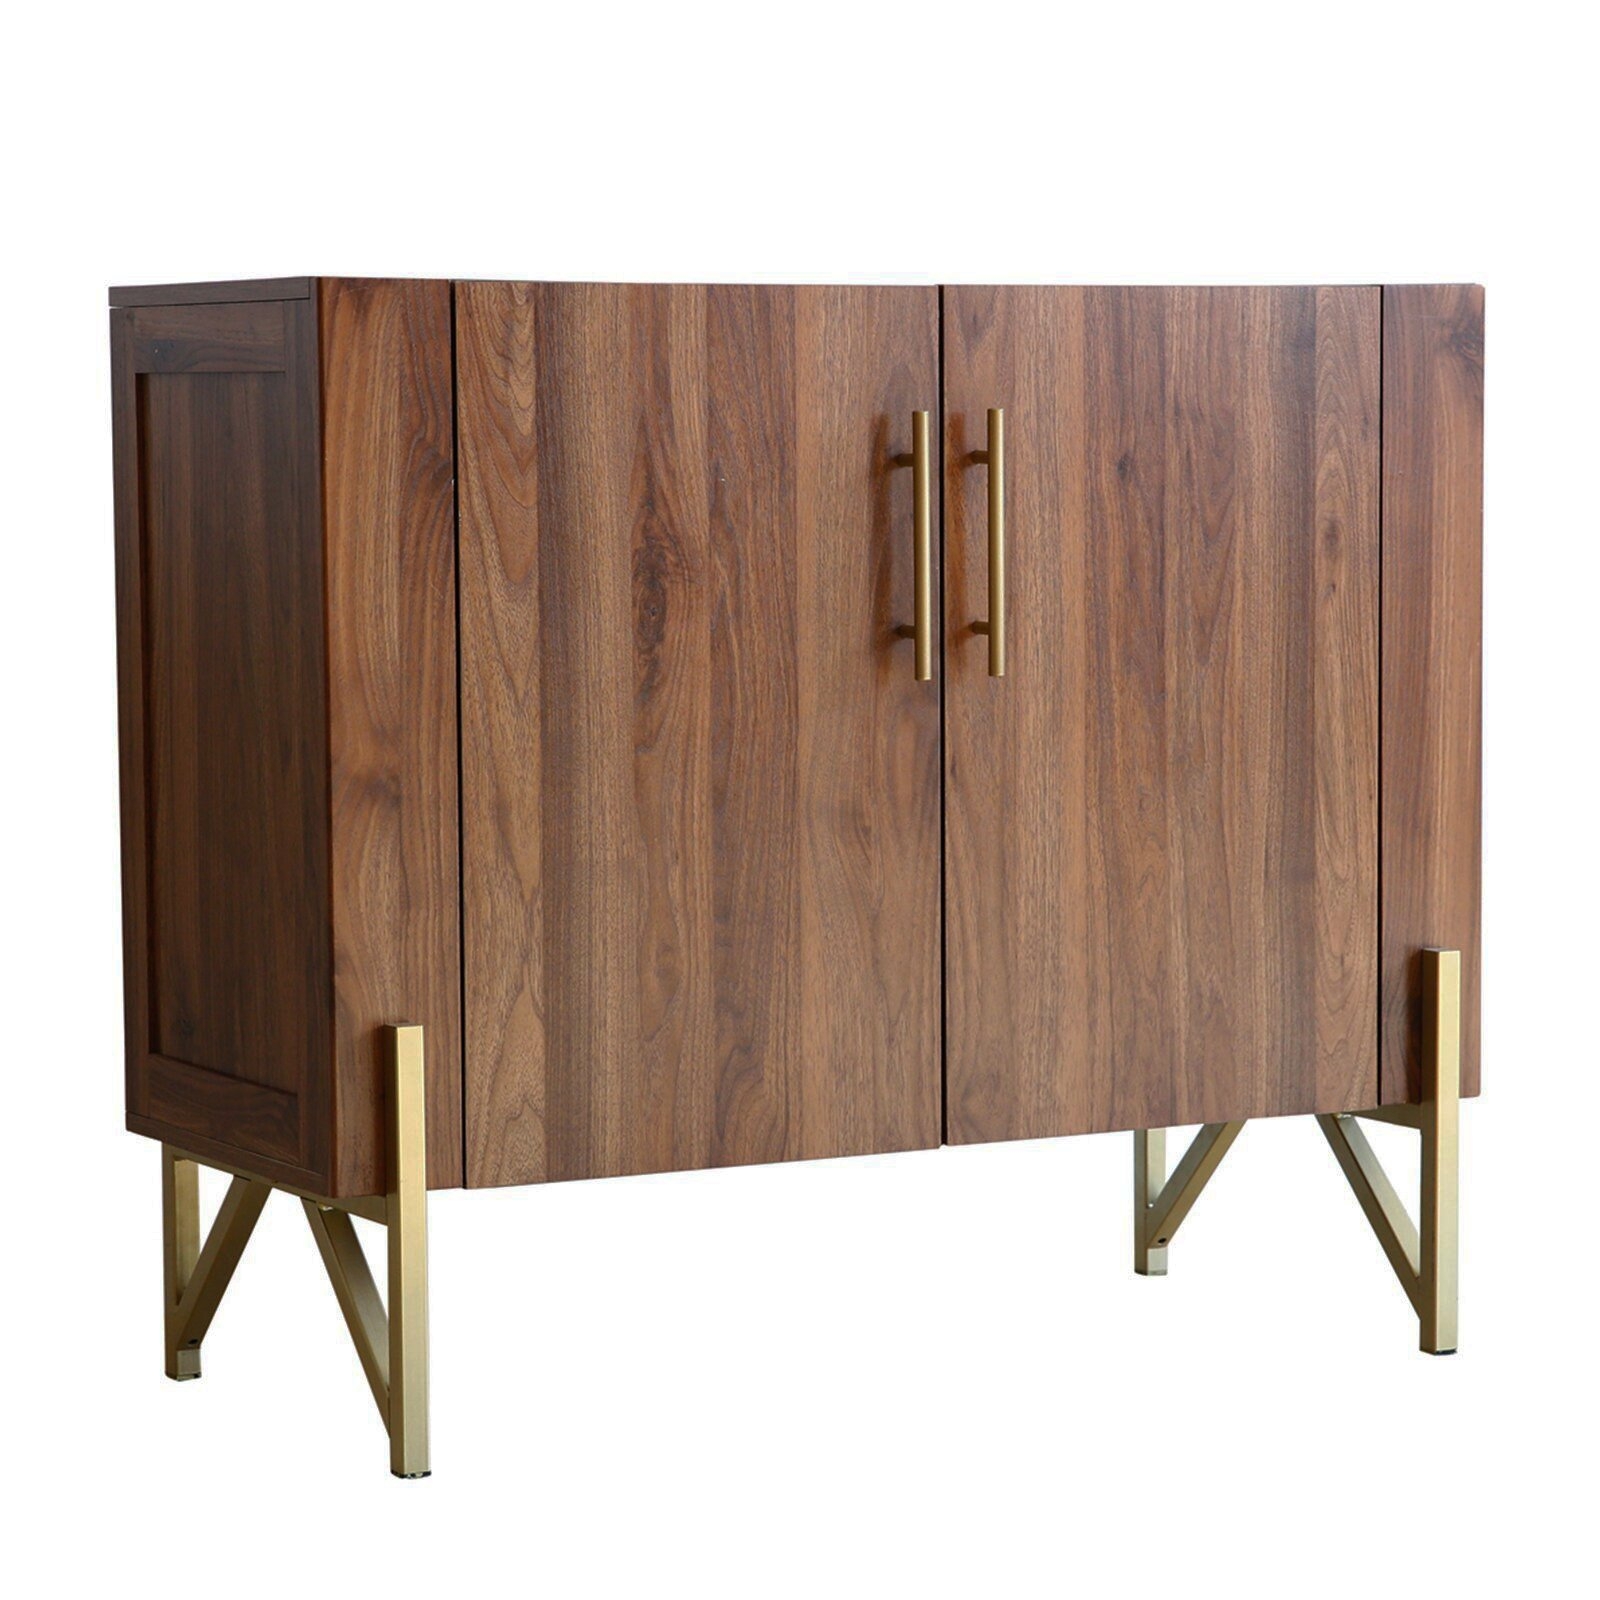 Caillat 39.37'' Wide Credenza - Image 1